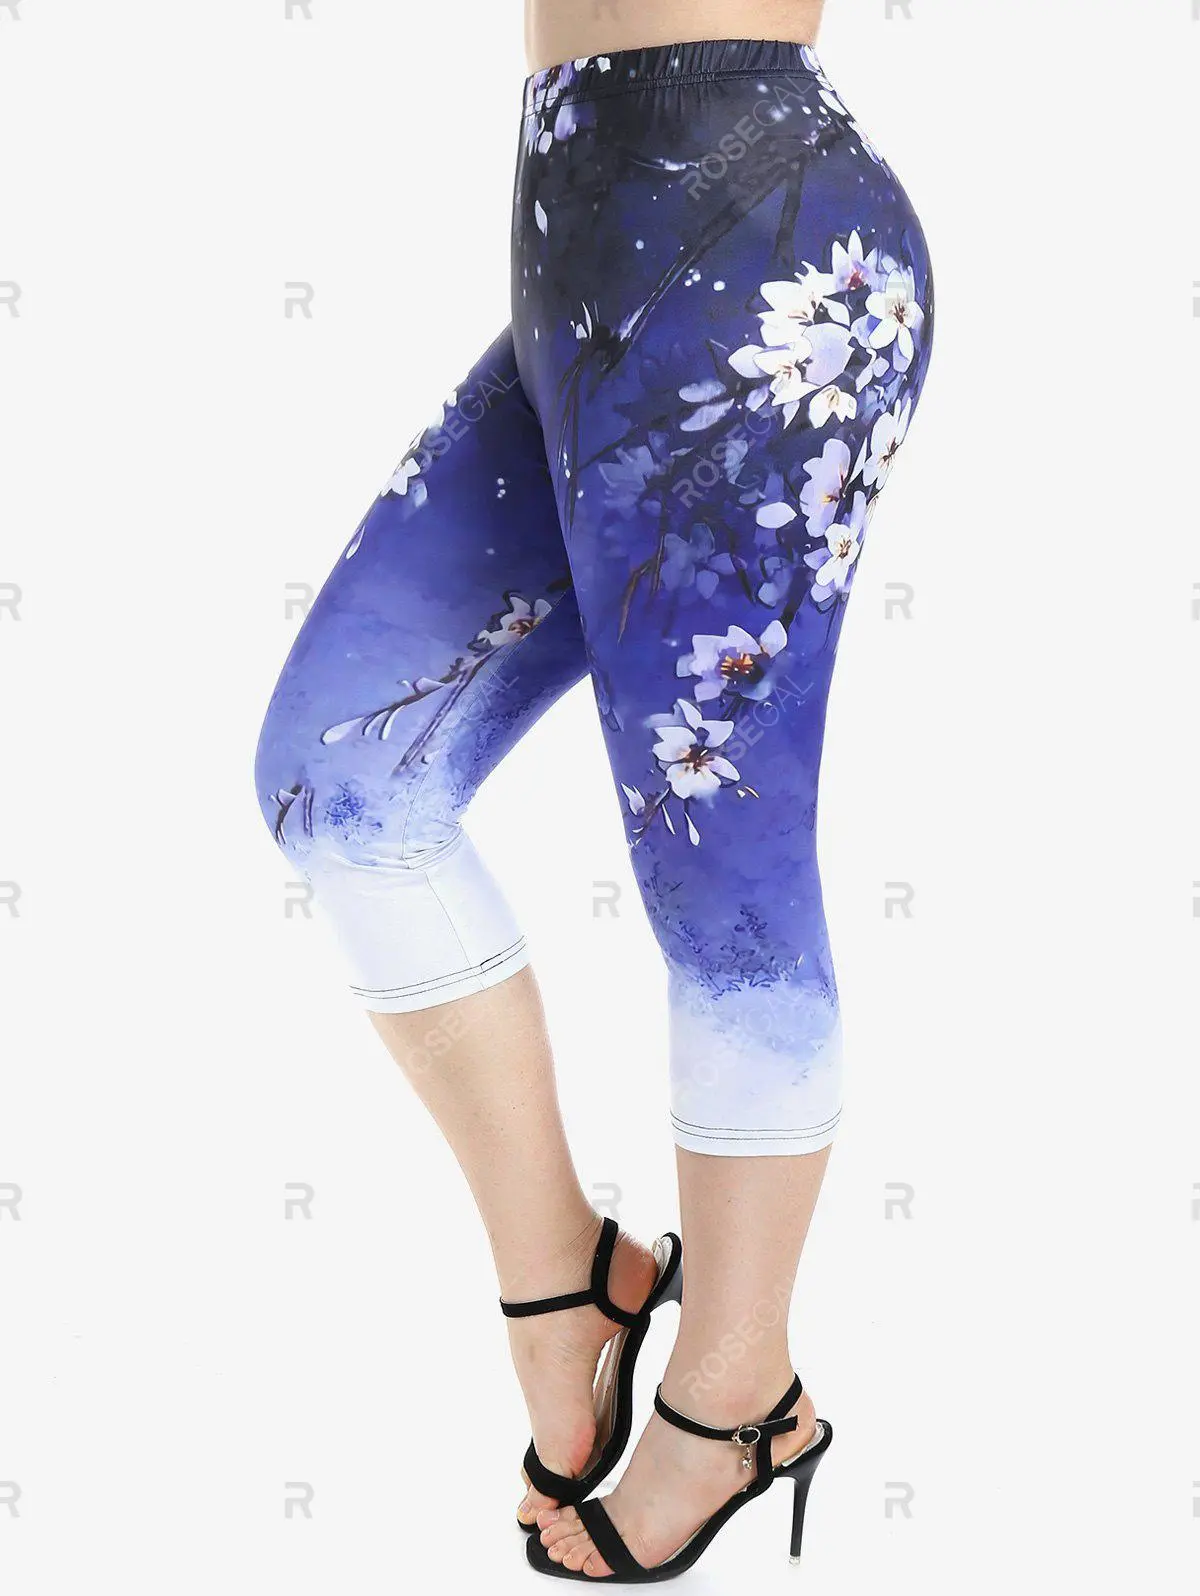 Floral Print Tee and High Waist Capri Leggings Plus Size Outfit